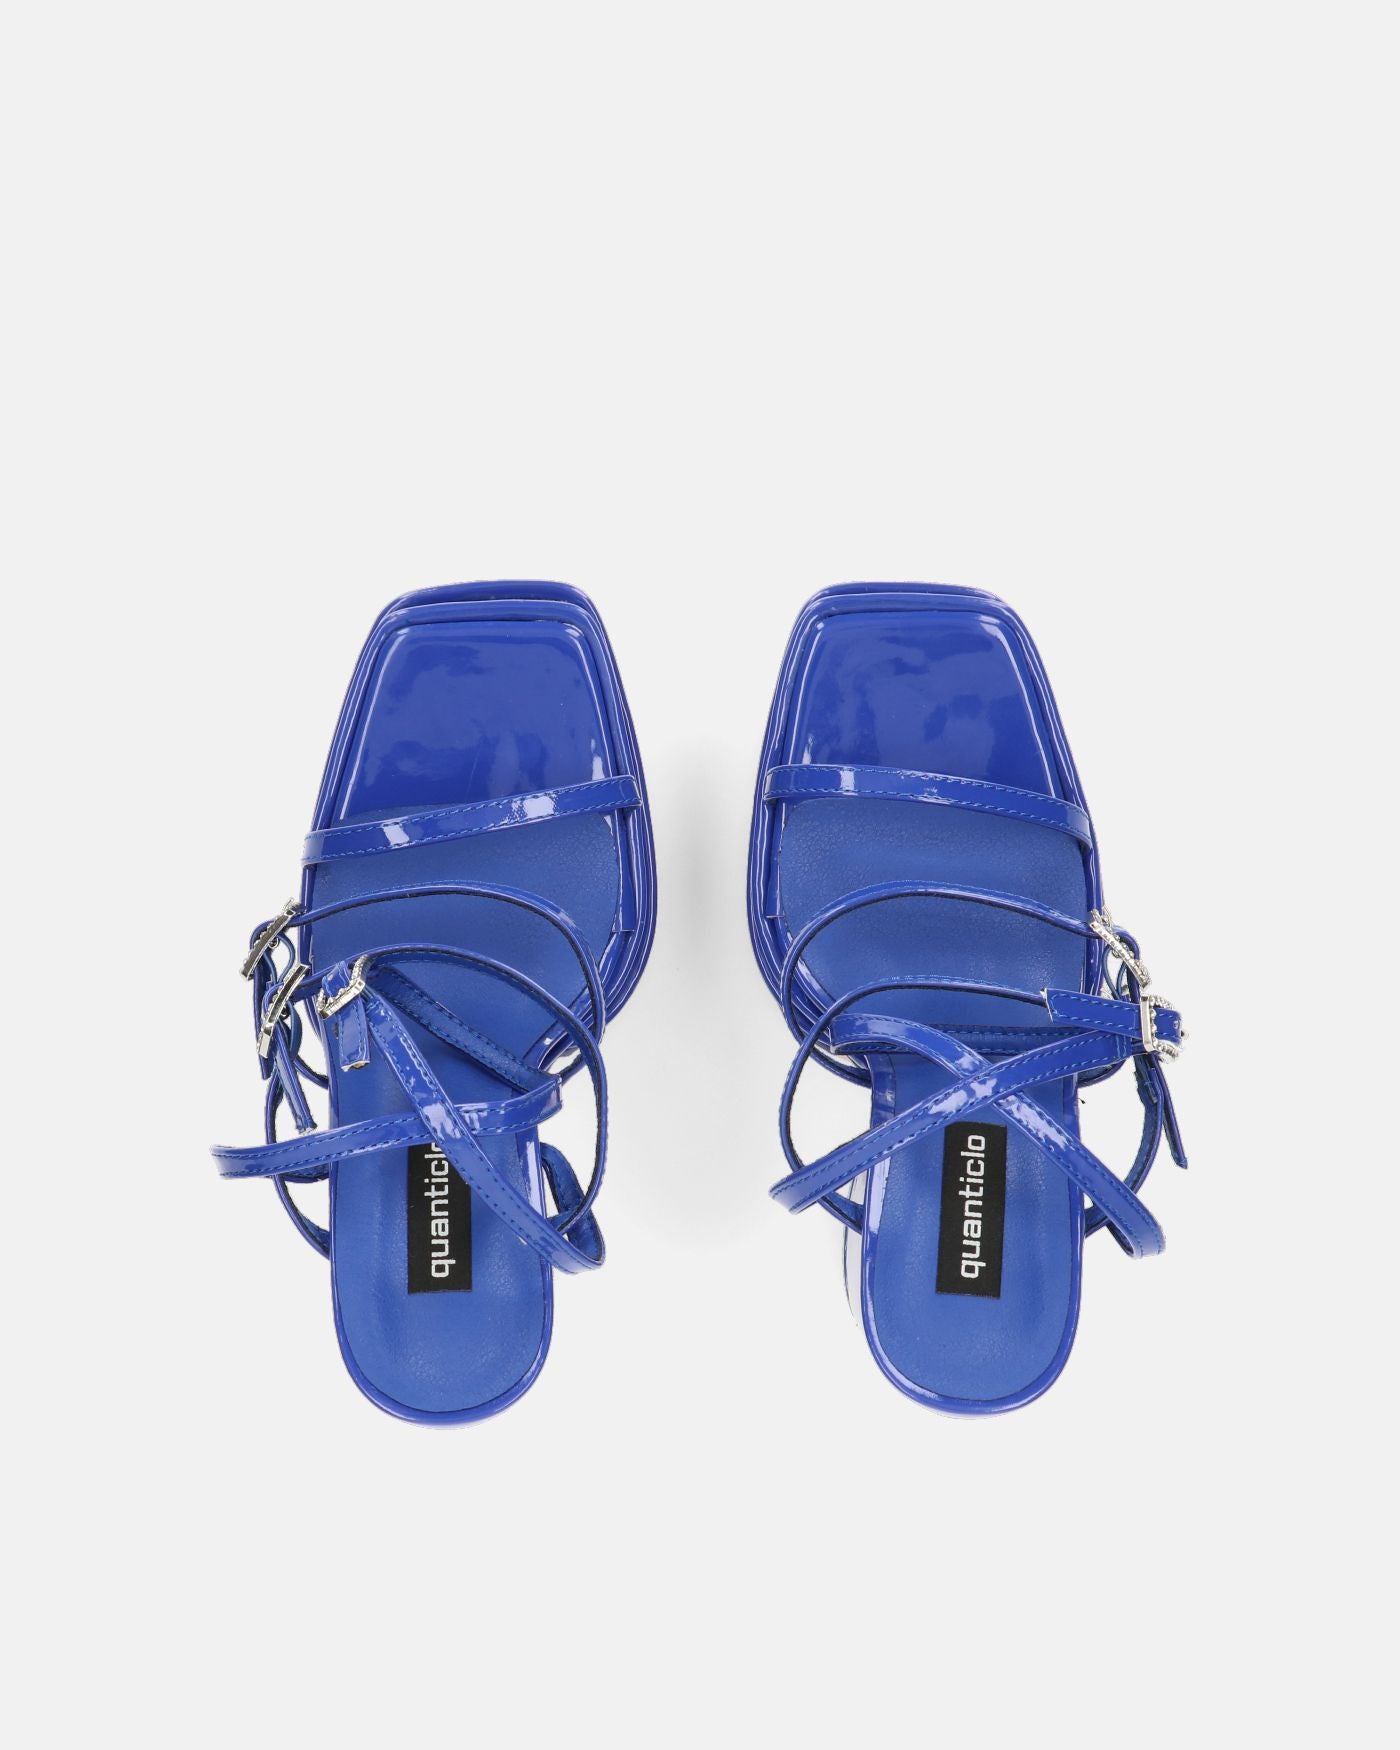 TEXA - sandals with strap and high heel in royal blue